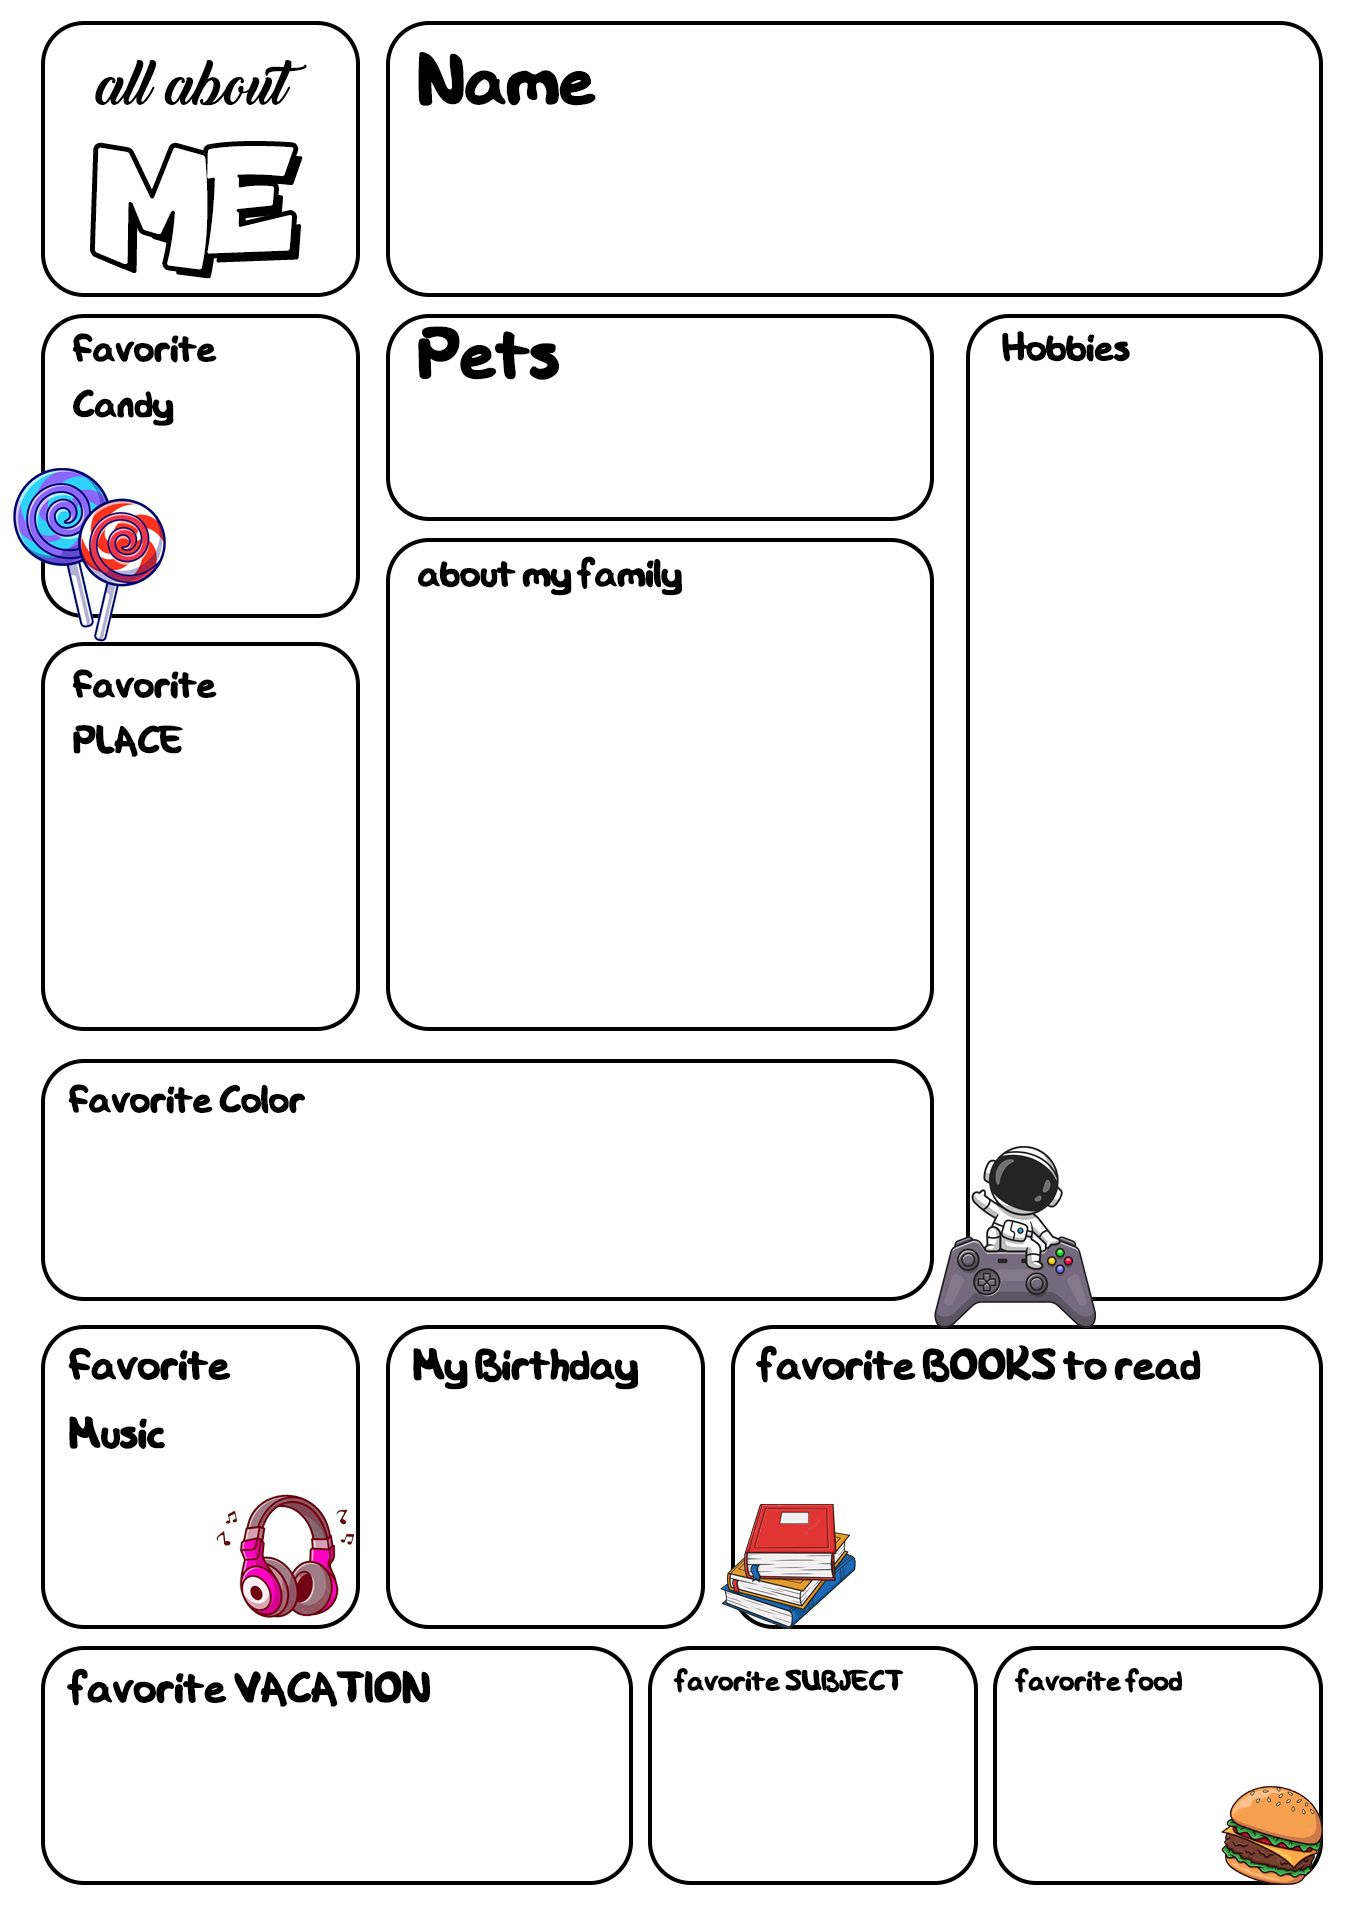 All About Me Worksheet Image